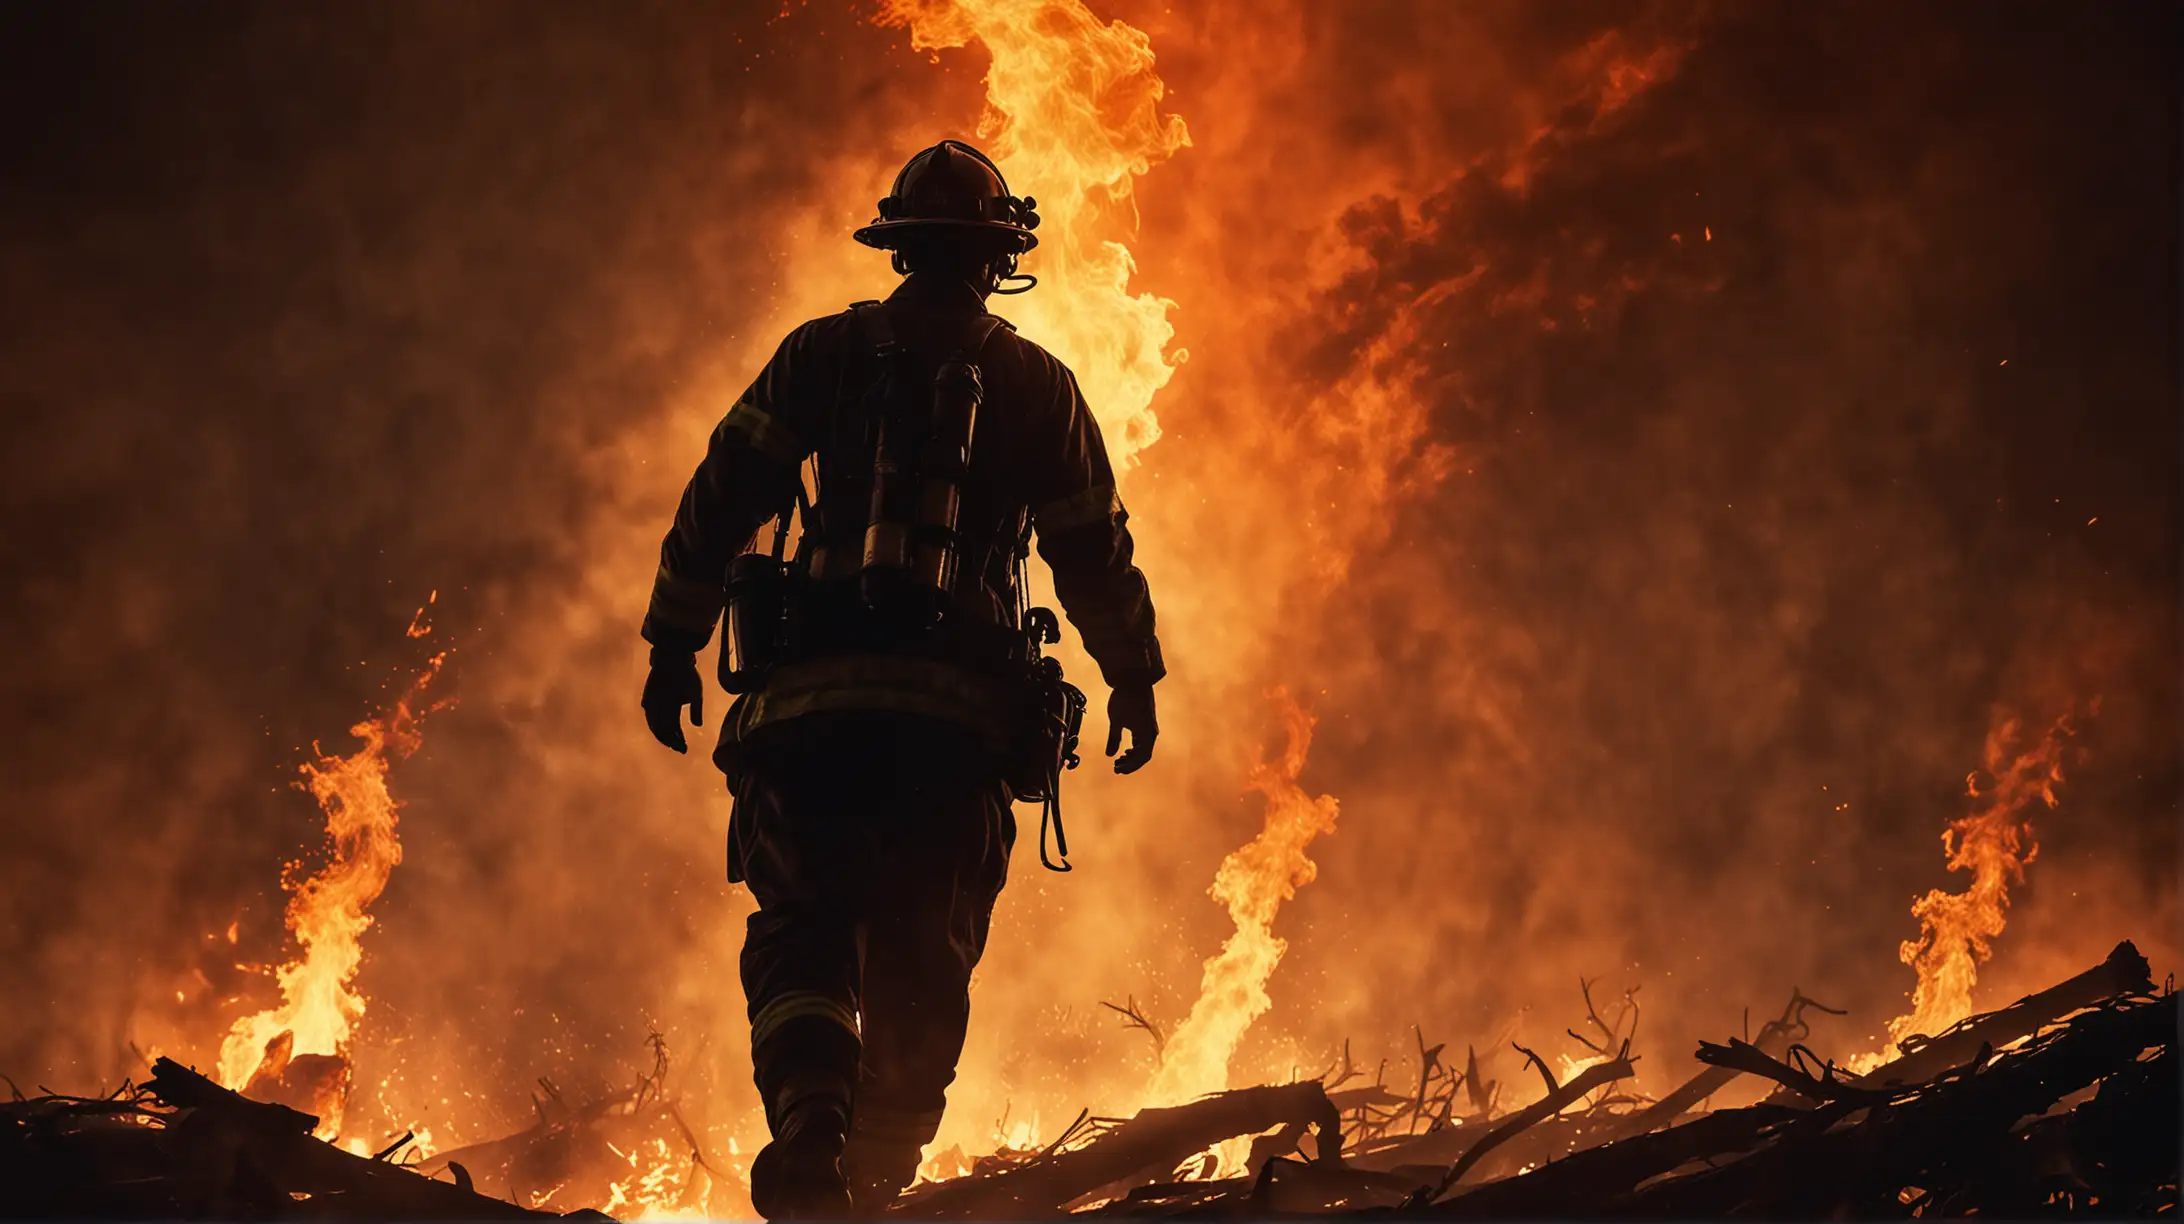 A brave fireman stands tall amidst the raging inferno, his silhouette illuminated by the flickering flames. The intense heat and smoke only add to the intensity of the scene, as he heroically saves lives and battles against the destructive force of nature.
